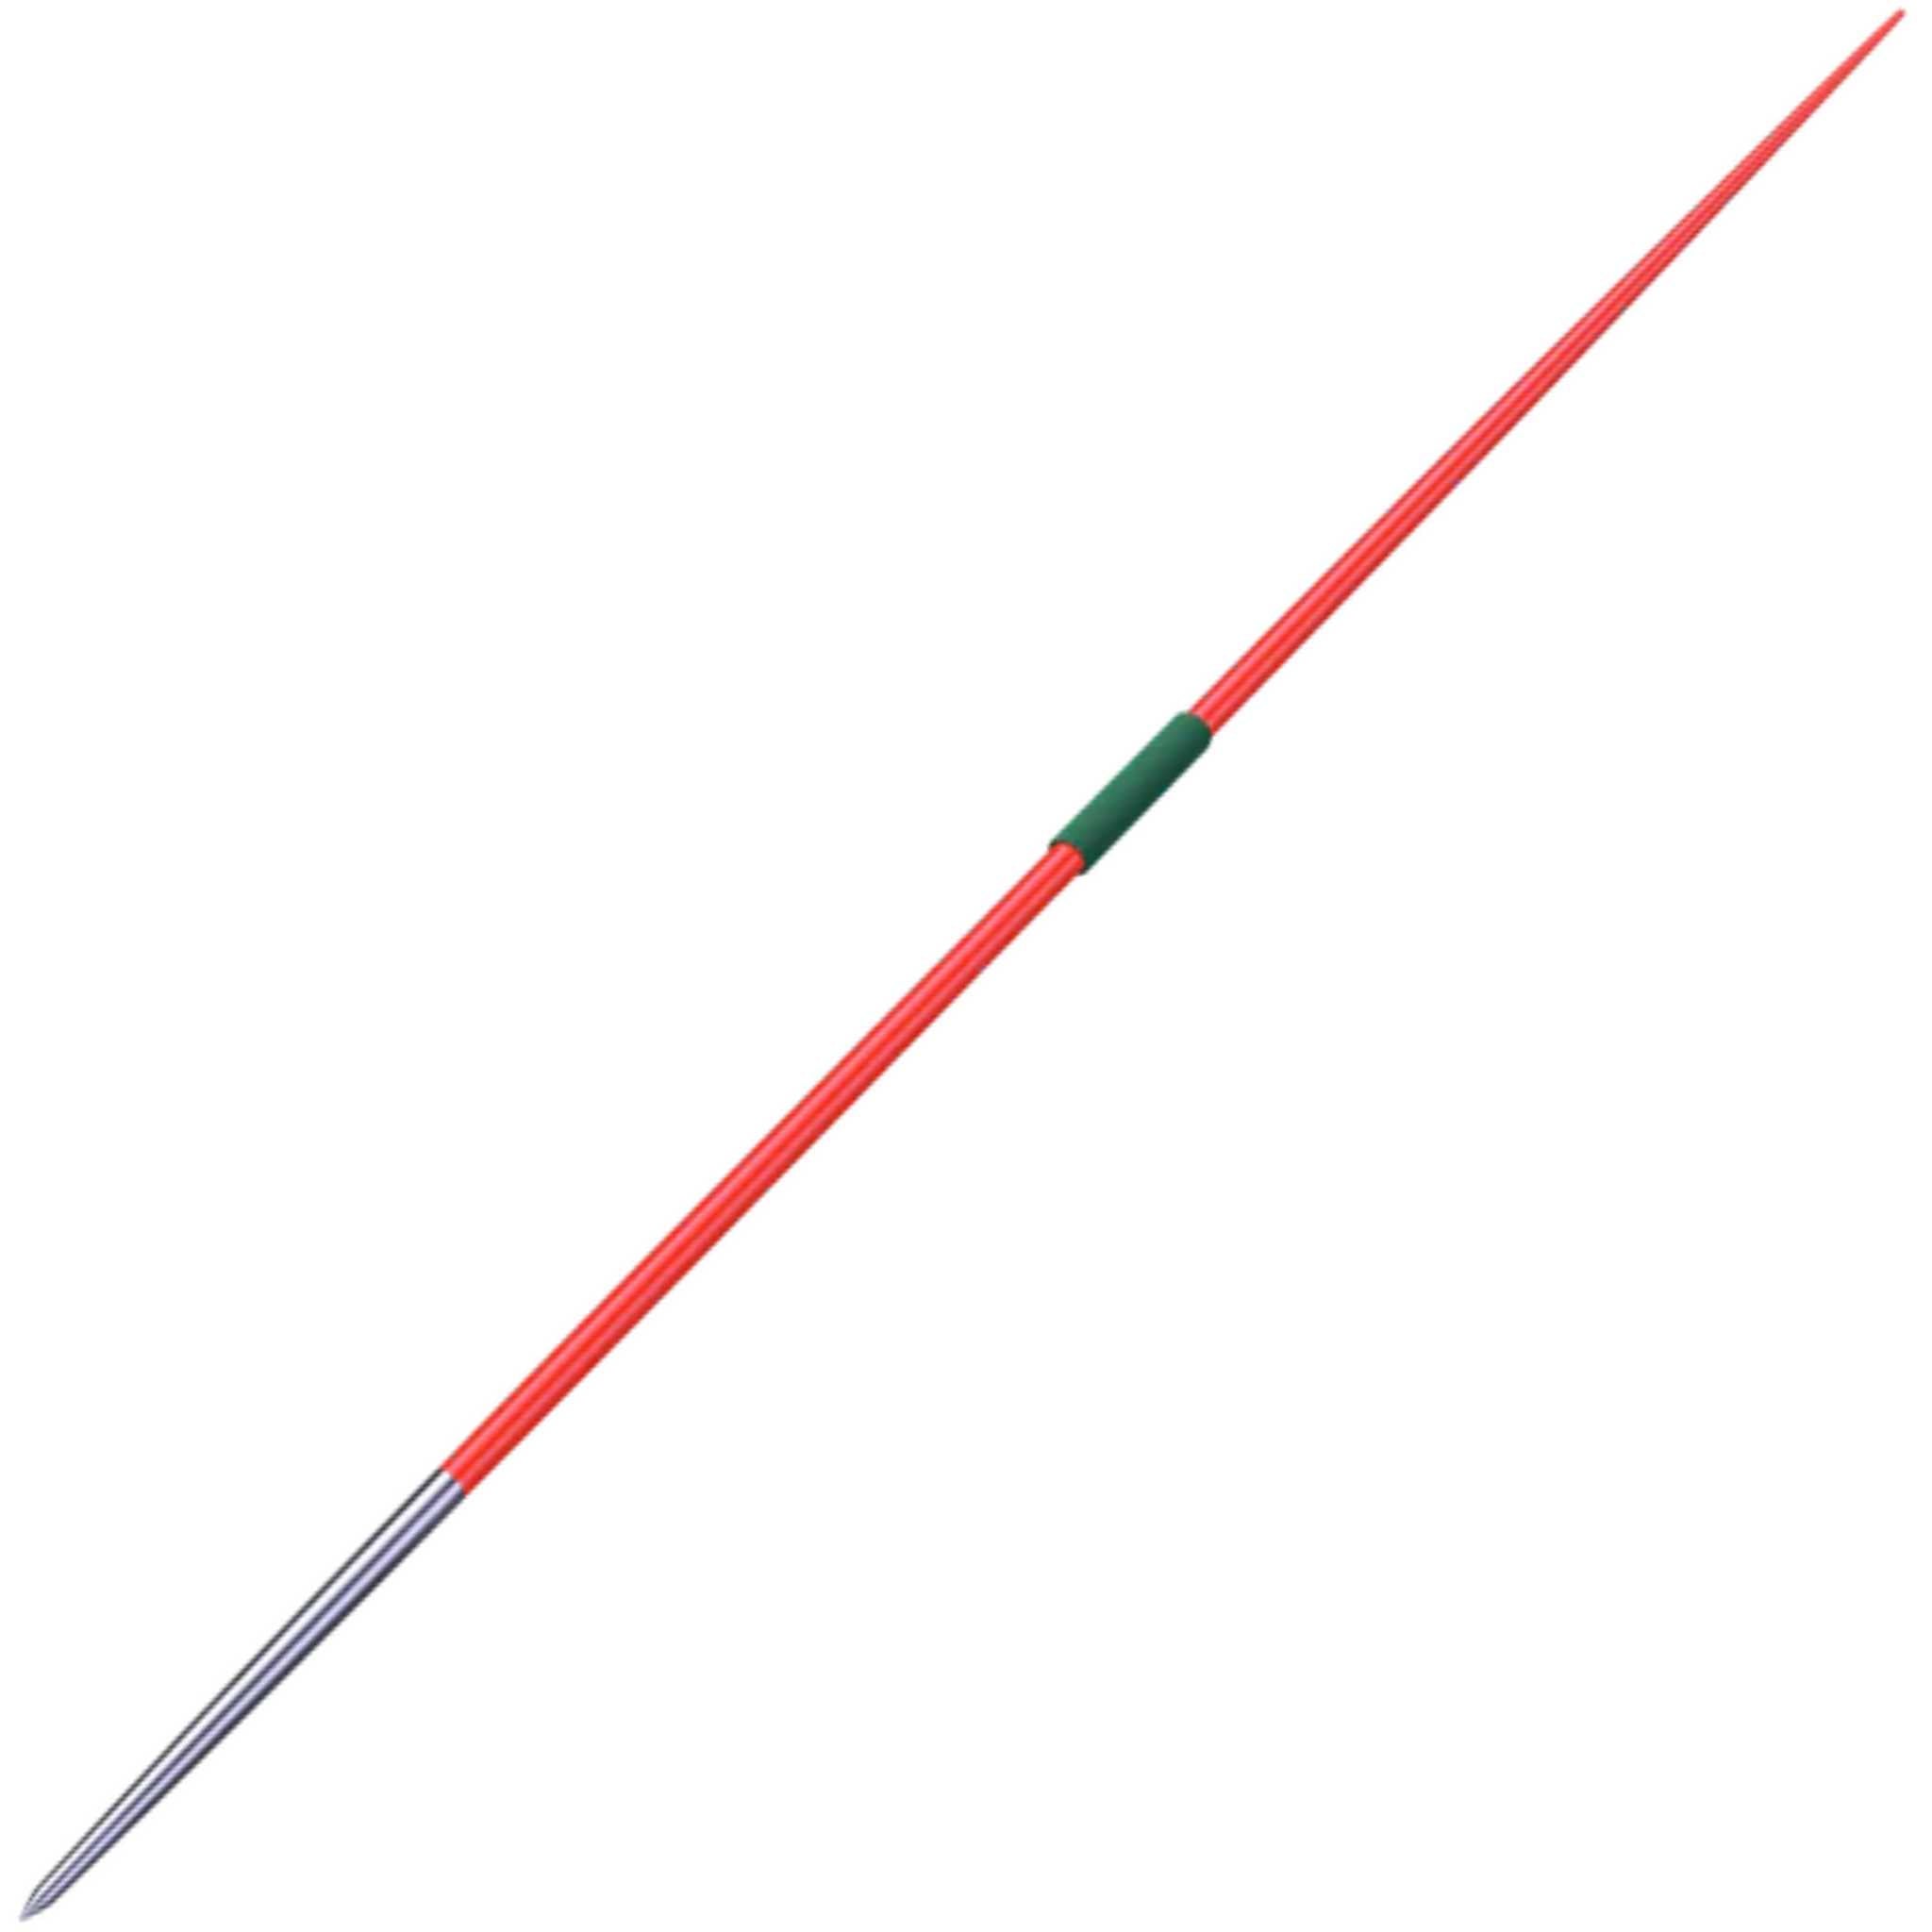 Nordic Comet Javelin | 800g, 700g, 600g, 500g, 400g | Orange javelin with green grip cord and silver nose